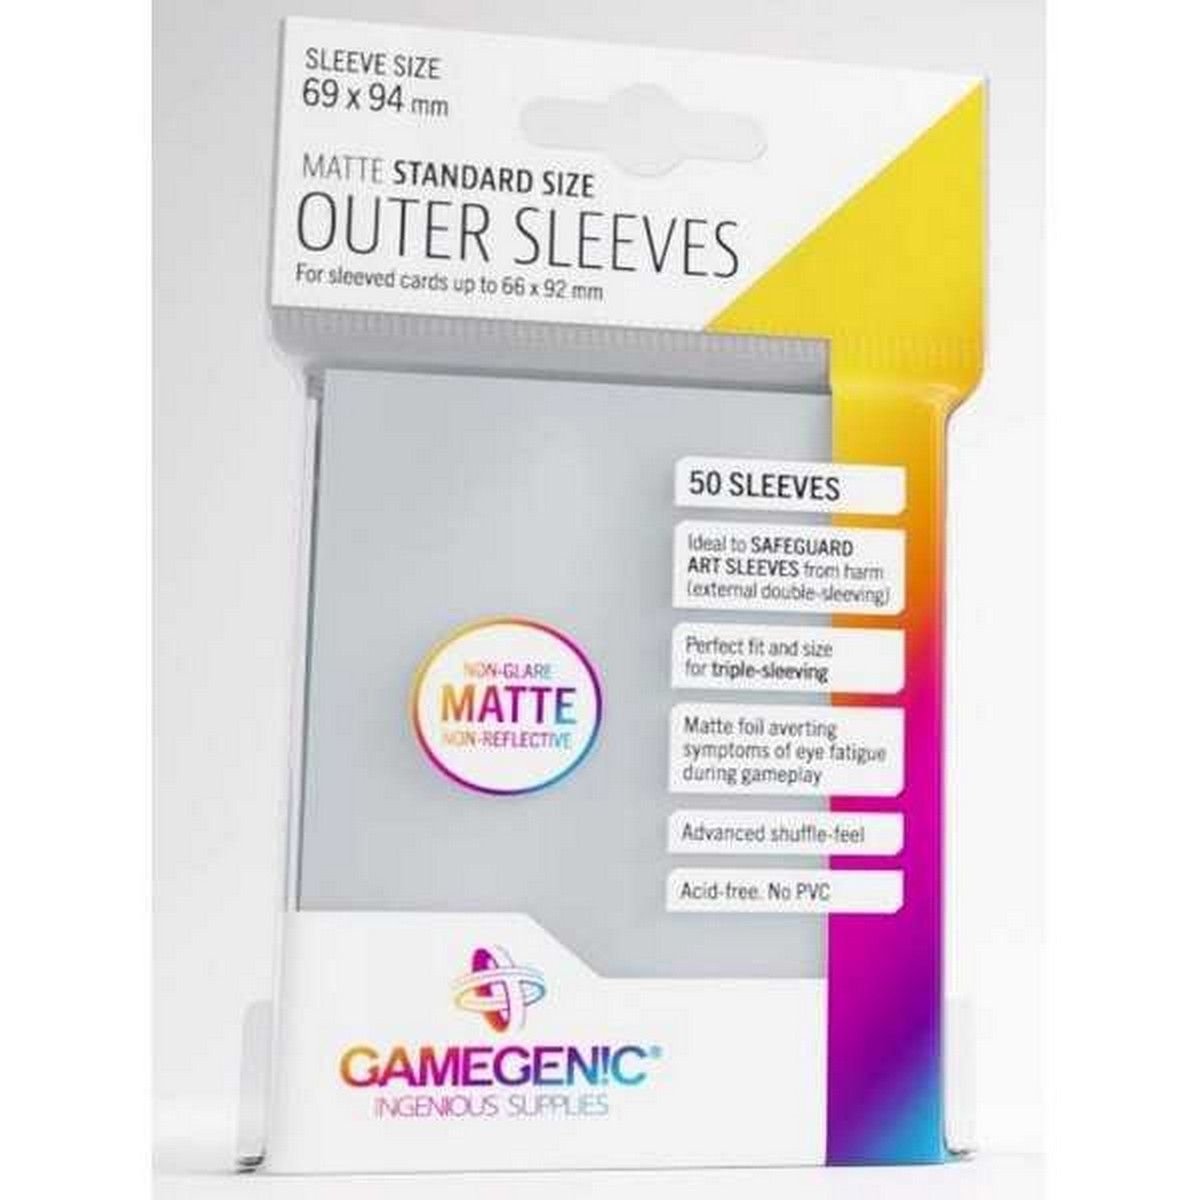 Gamegenic: Outer Sleeves Matte - Standard Size